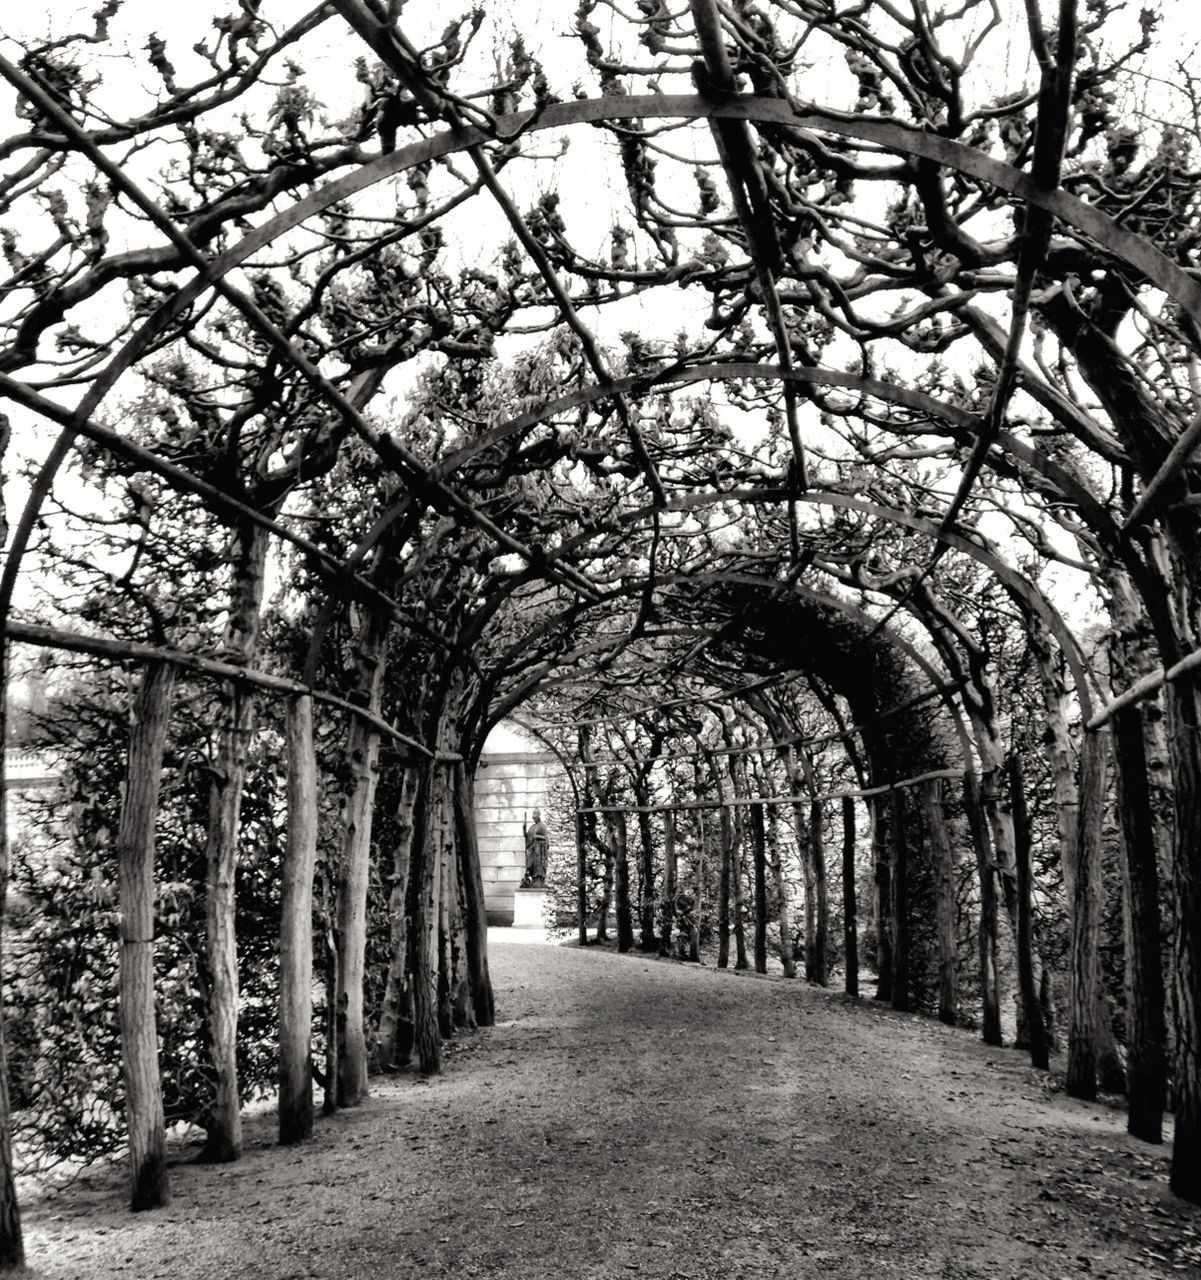 Arched ceiling covered with ivy in park